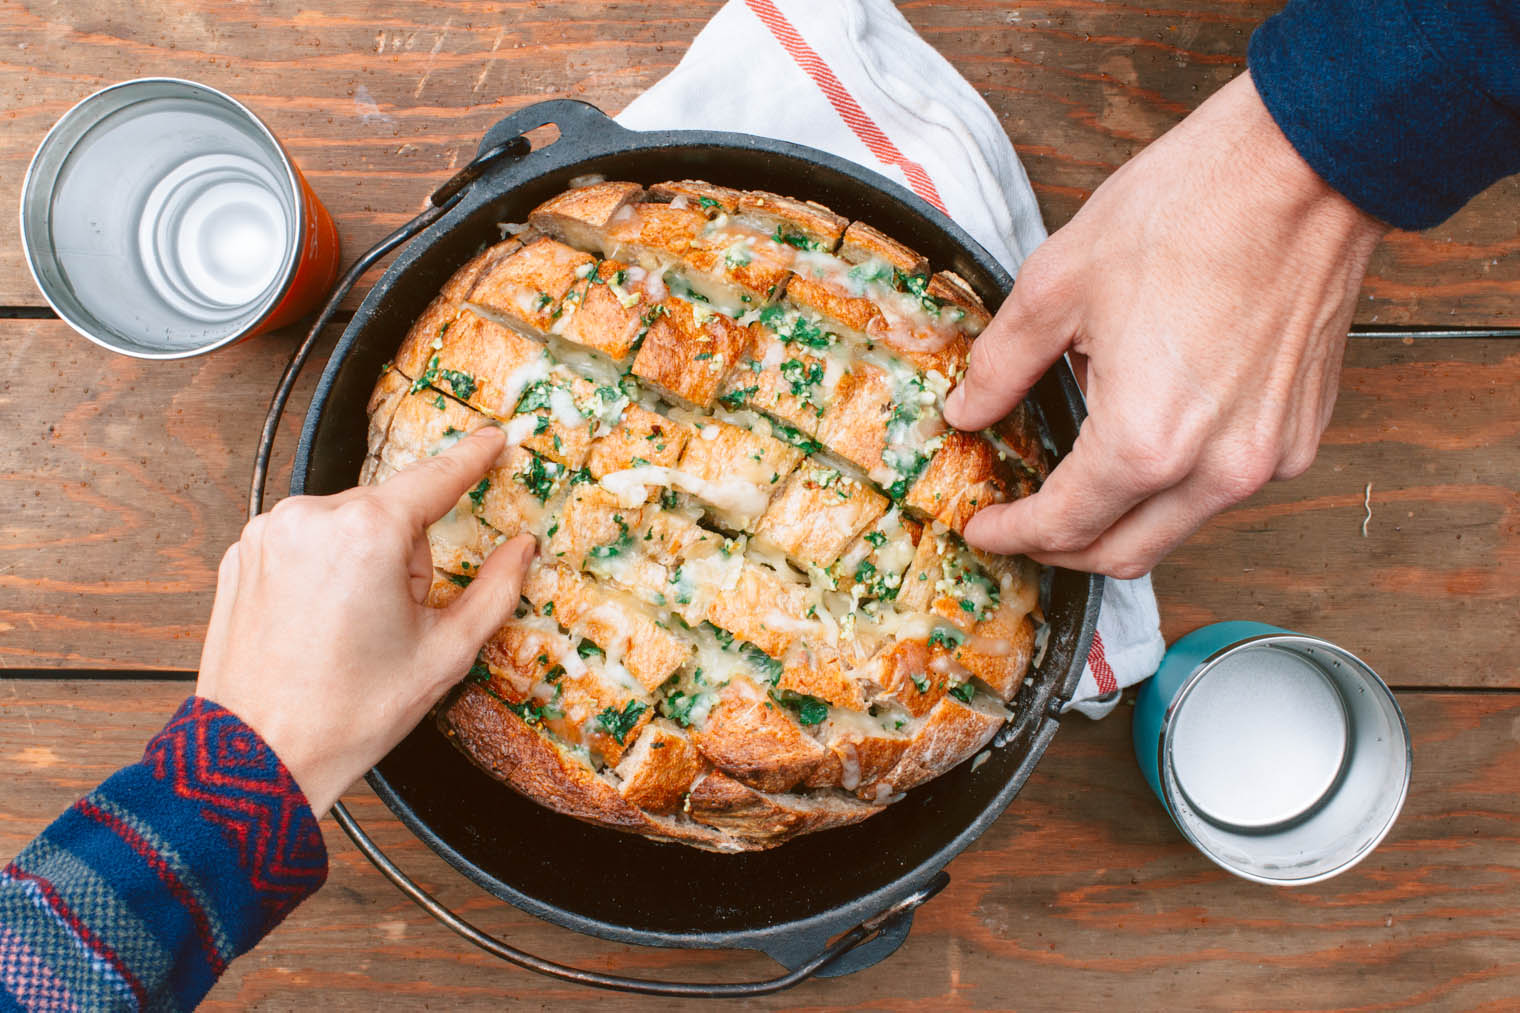 Pull apart bread in a Dutch oven Megan and Michael are reaching into grab a piece